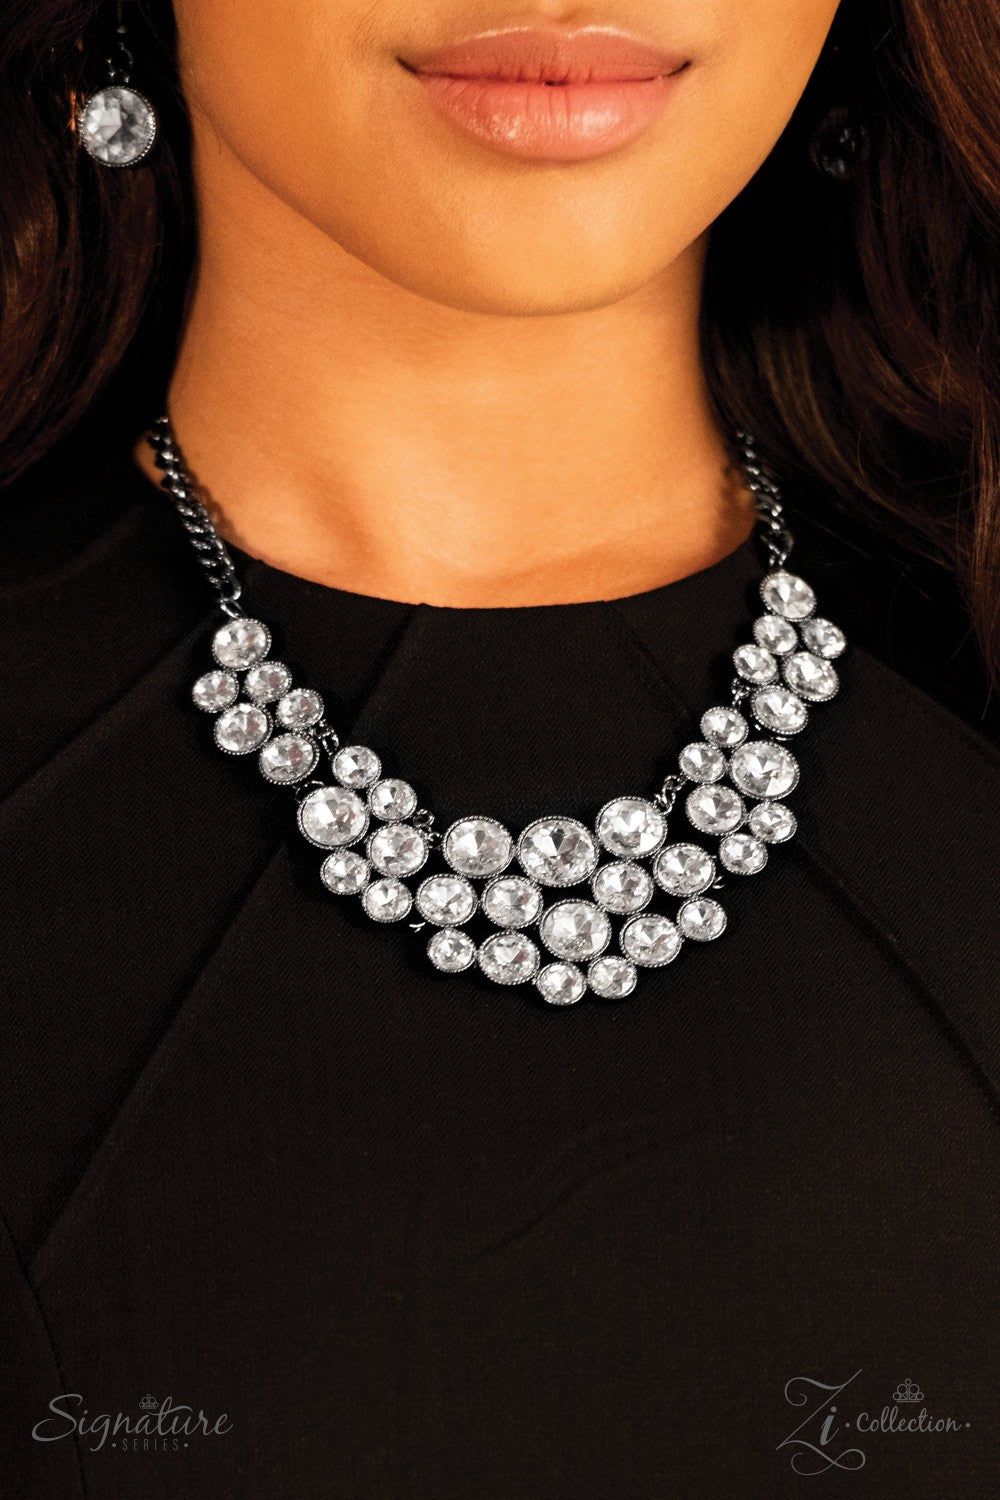 The Angela - Zi Collection - Paparazzi necklace